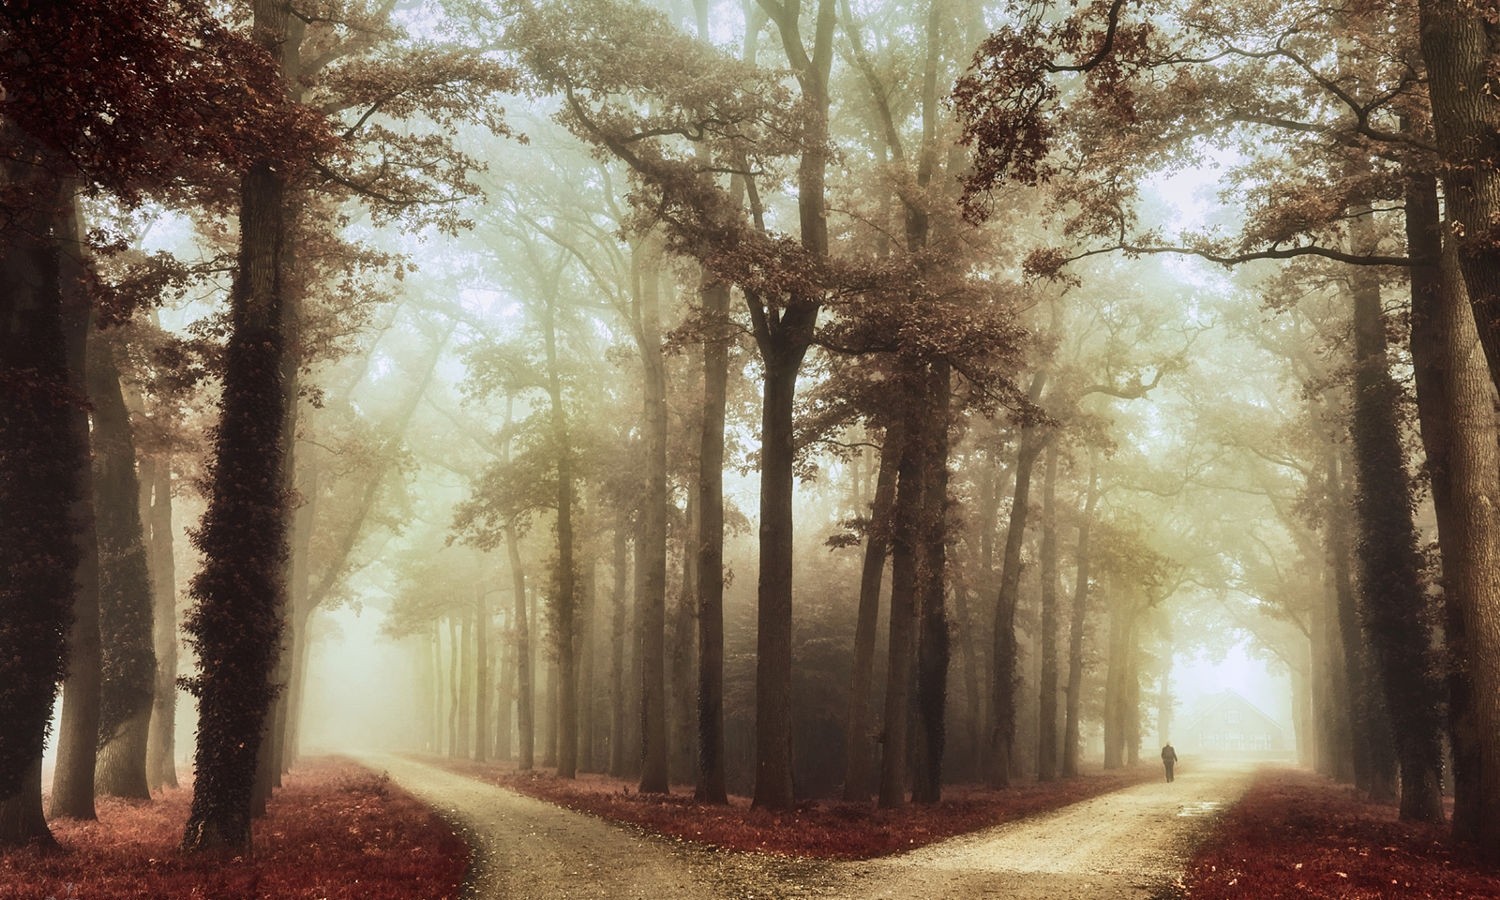 photography, Nature, Landscape, Morning, Natural light, Trees, Fall, Road, Mist Wallpaper